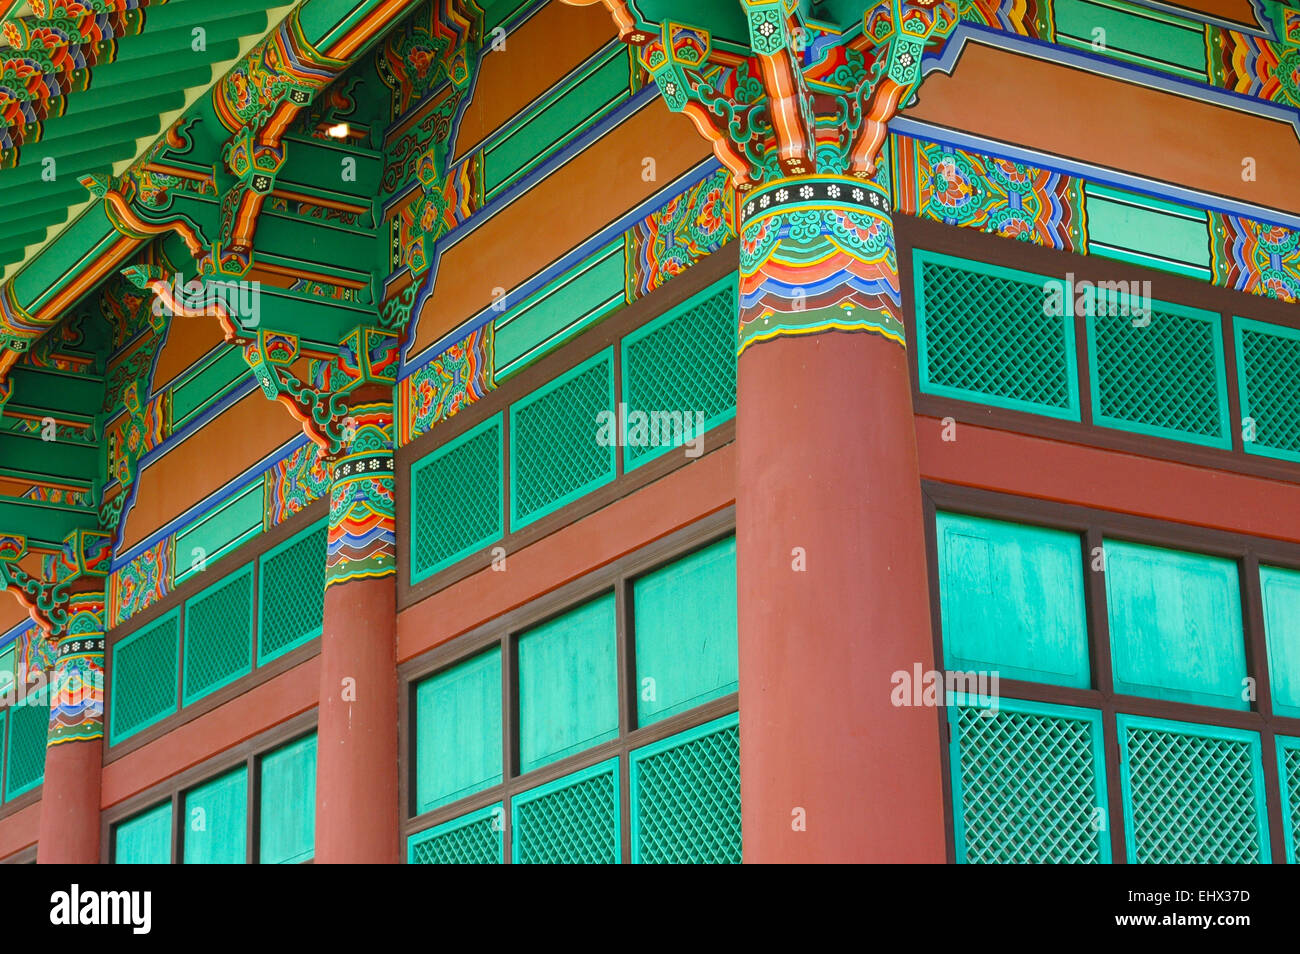 Travel Image Of Detail Of Colorful Korean Architecture Stock Photo